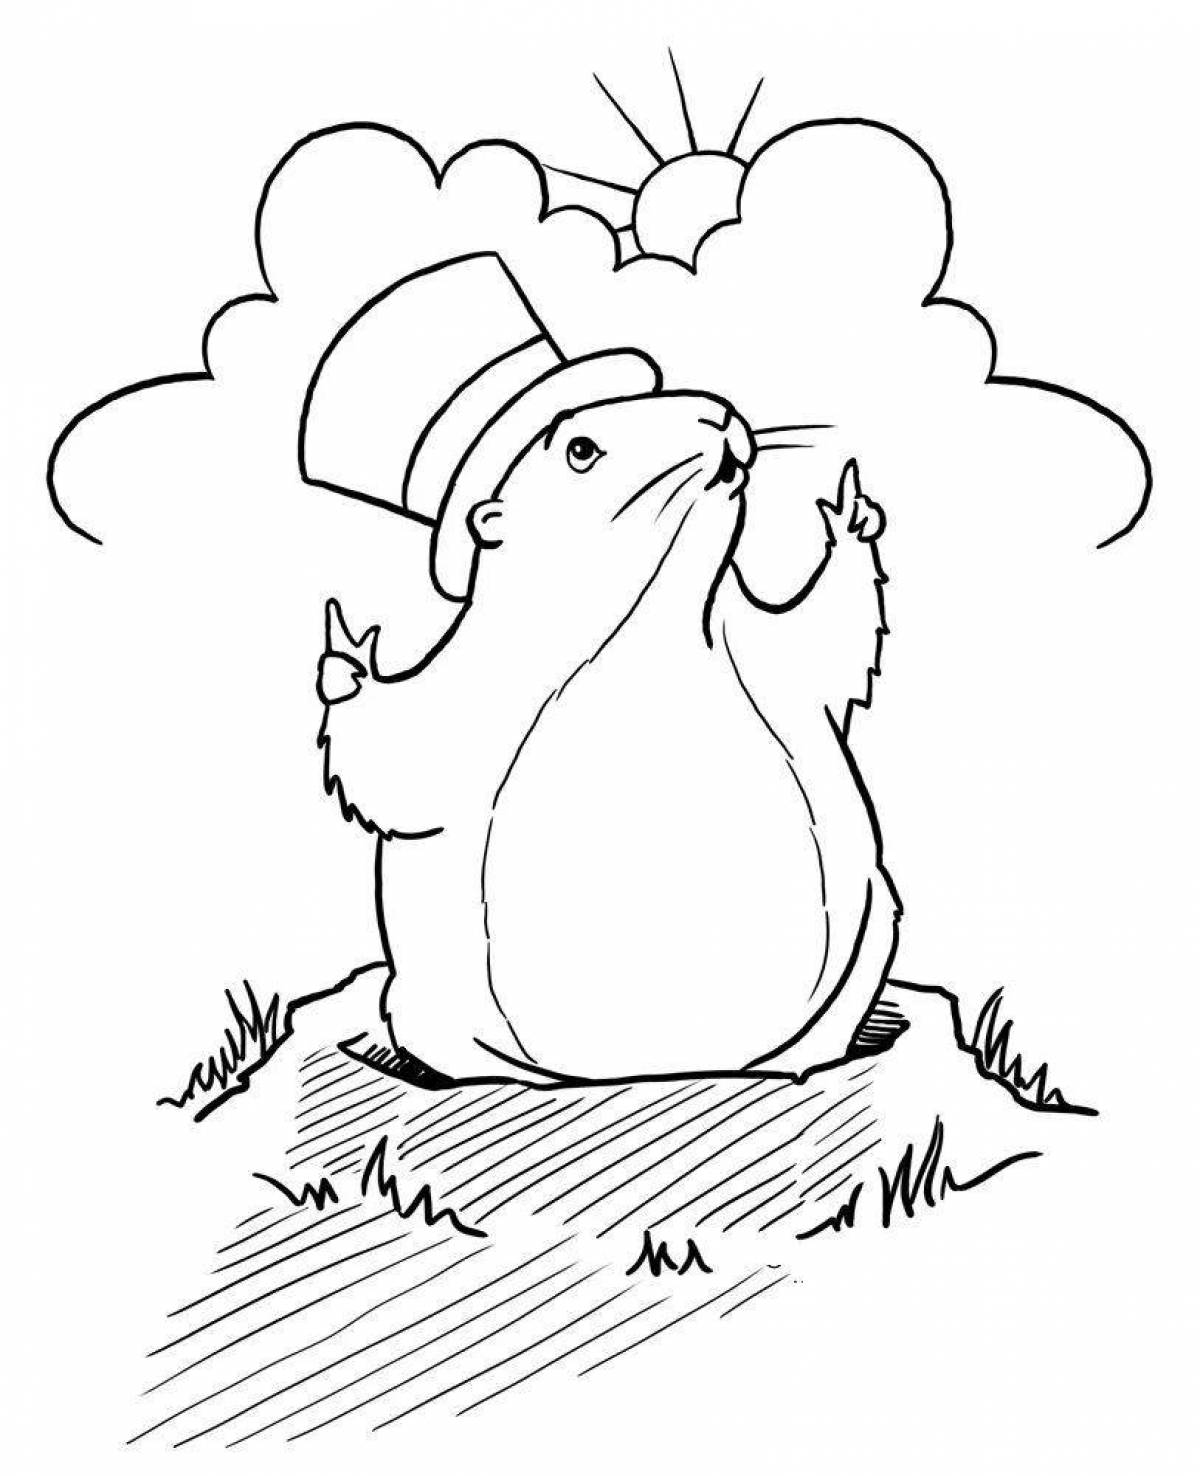 Fairy Groundhog Coloring Page